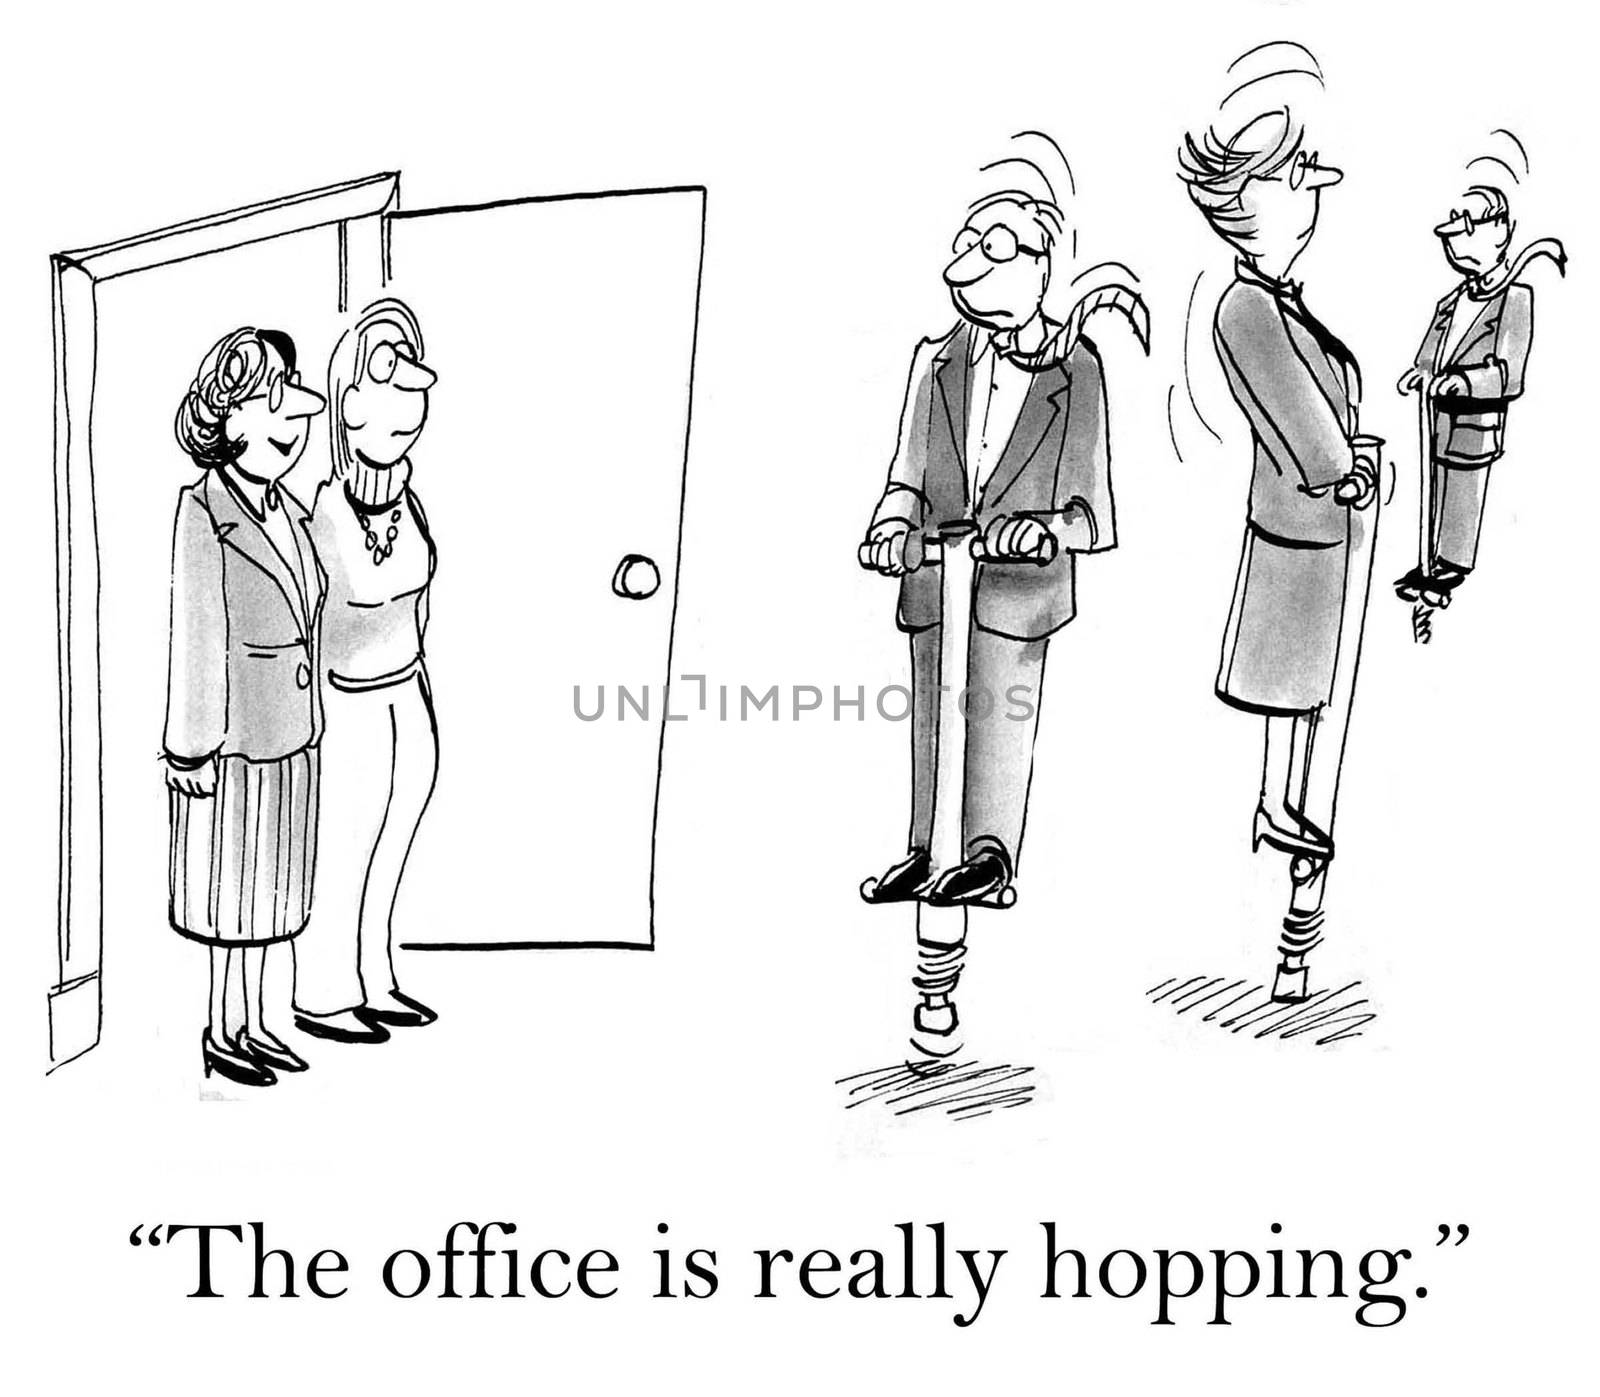 "The office is hopping." for female exec